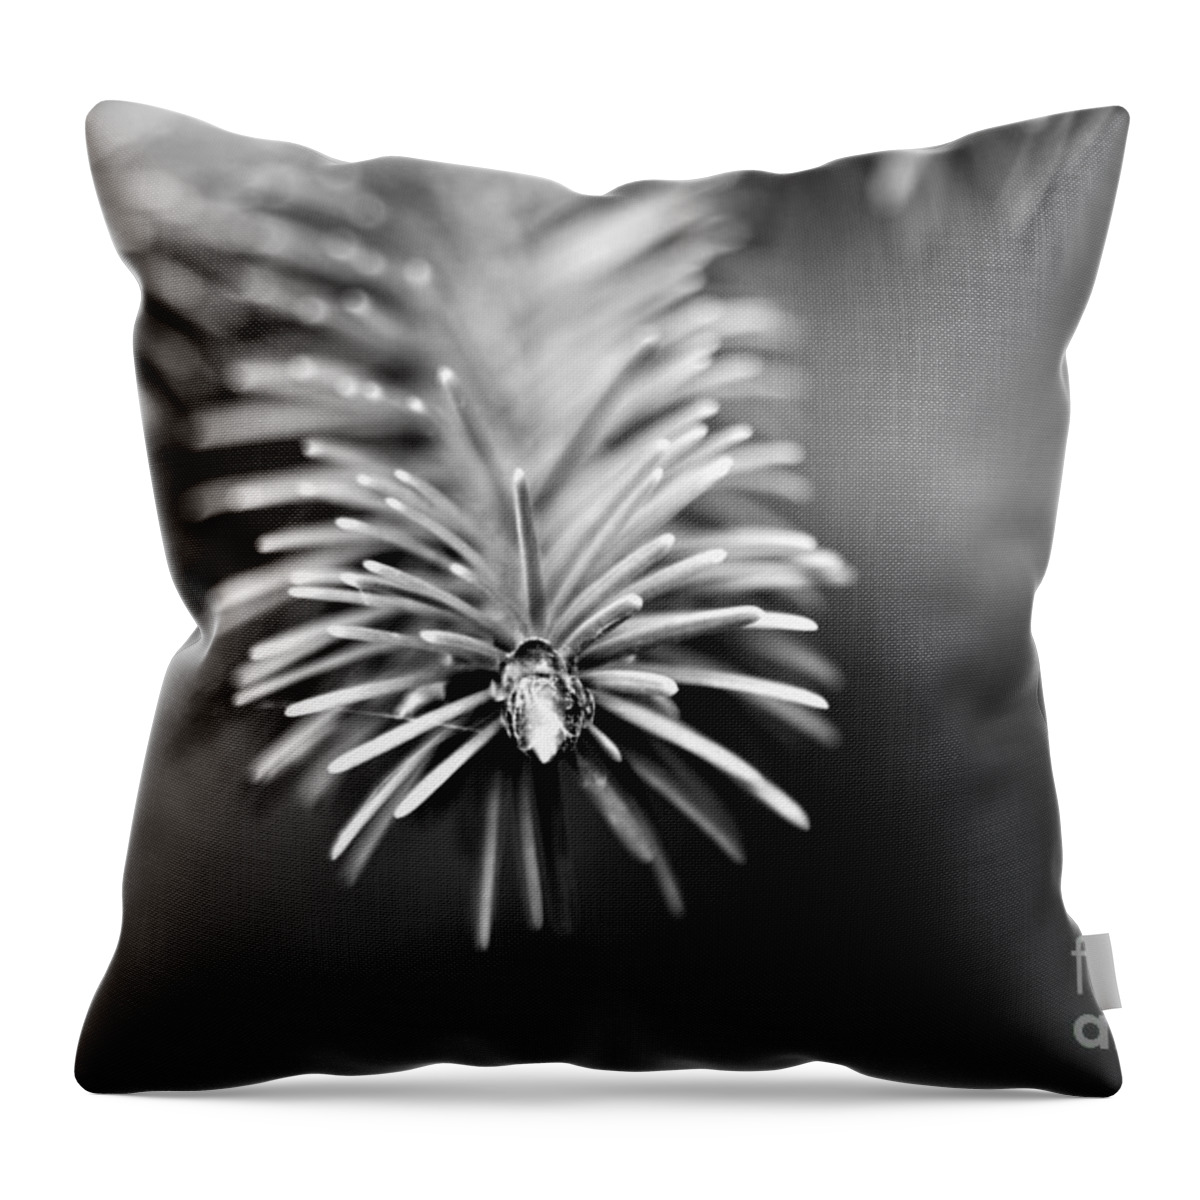 Black And White Throw Pillow featuring the photograph Spruce Bud by Tracey Lee Cassin